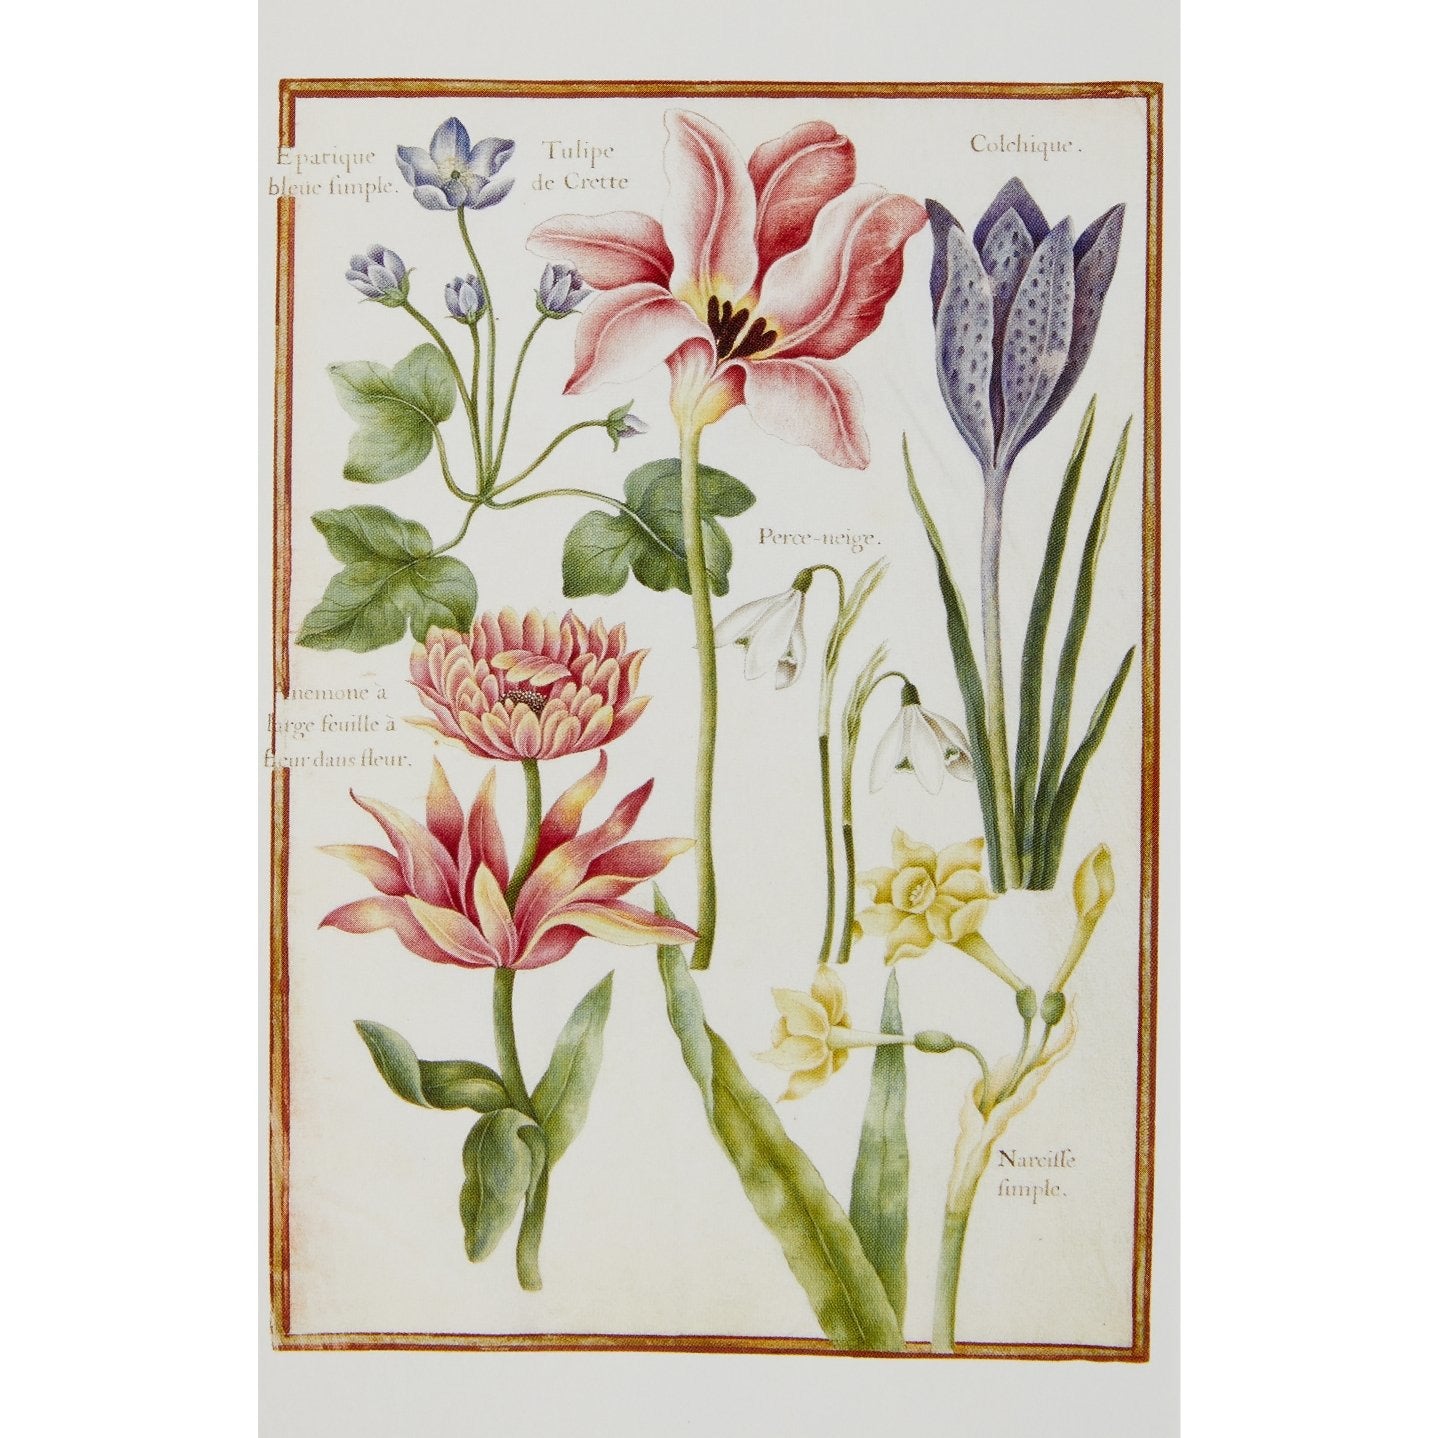 Notecard image - Flowering Bulbs and Corms by Nicolas Robert. From the Broughton collection of the Fitzwilliam Museum, brought to you by CuratingCambridge.co.uk